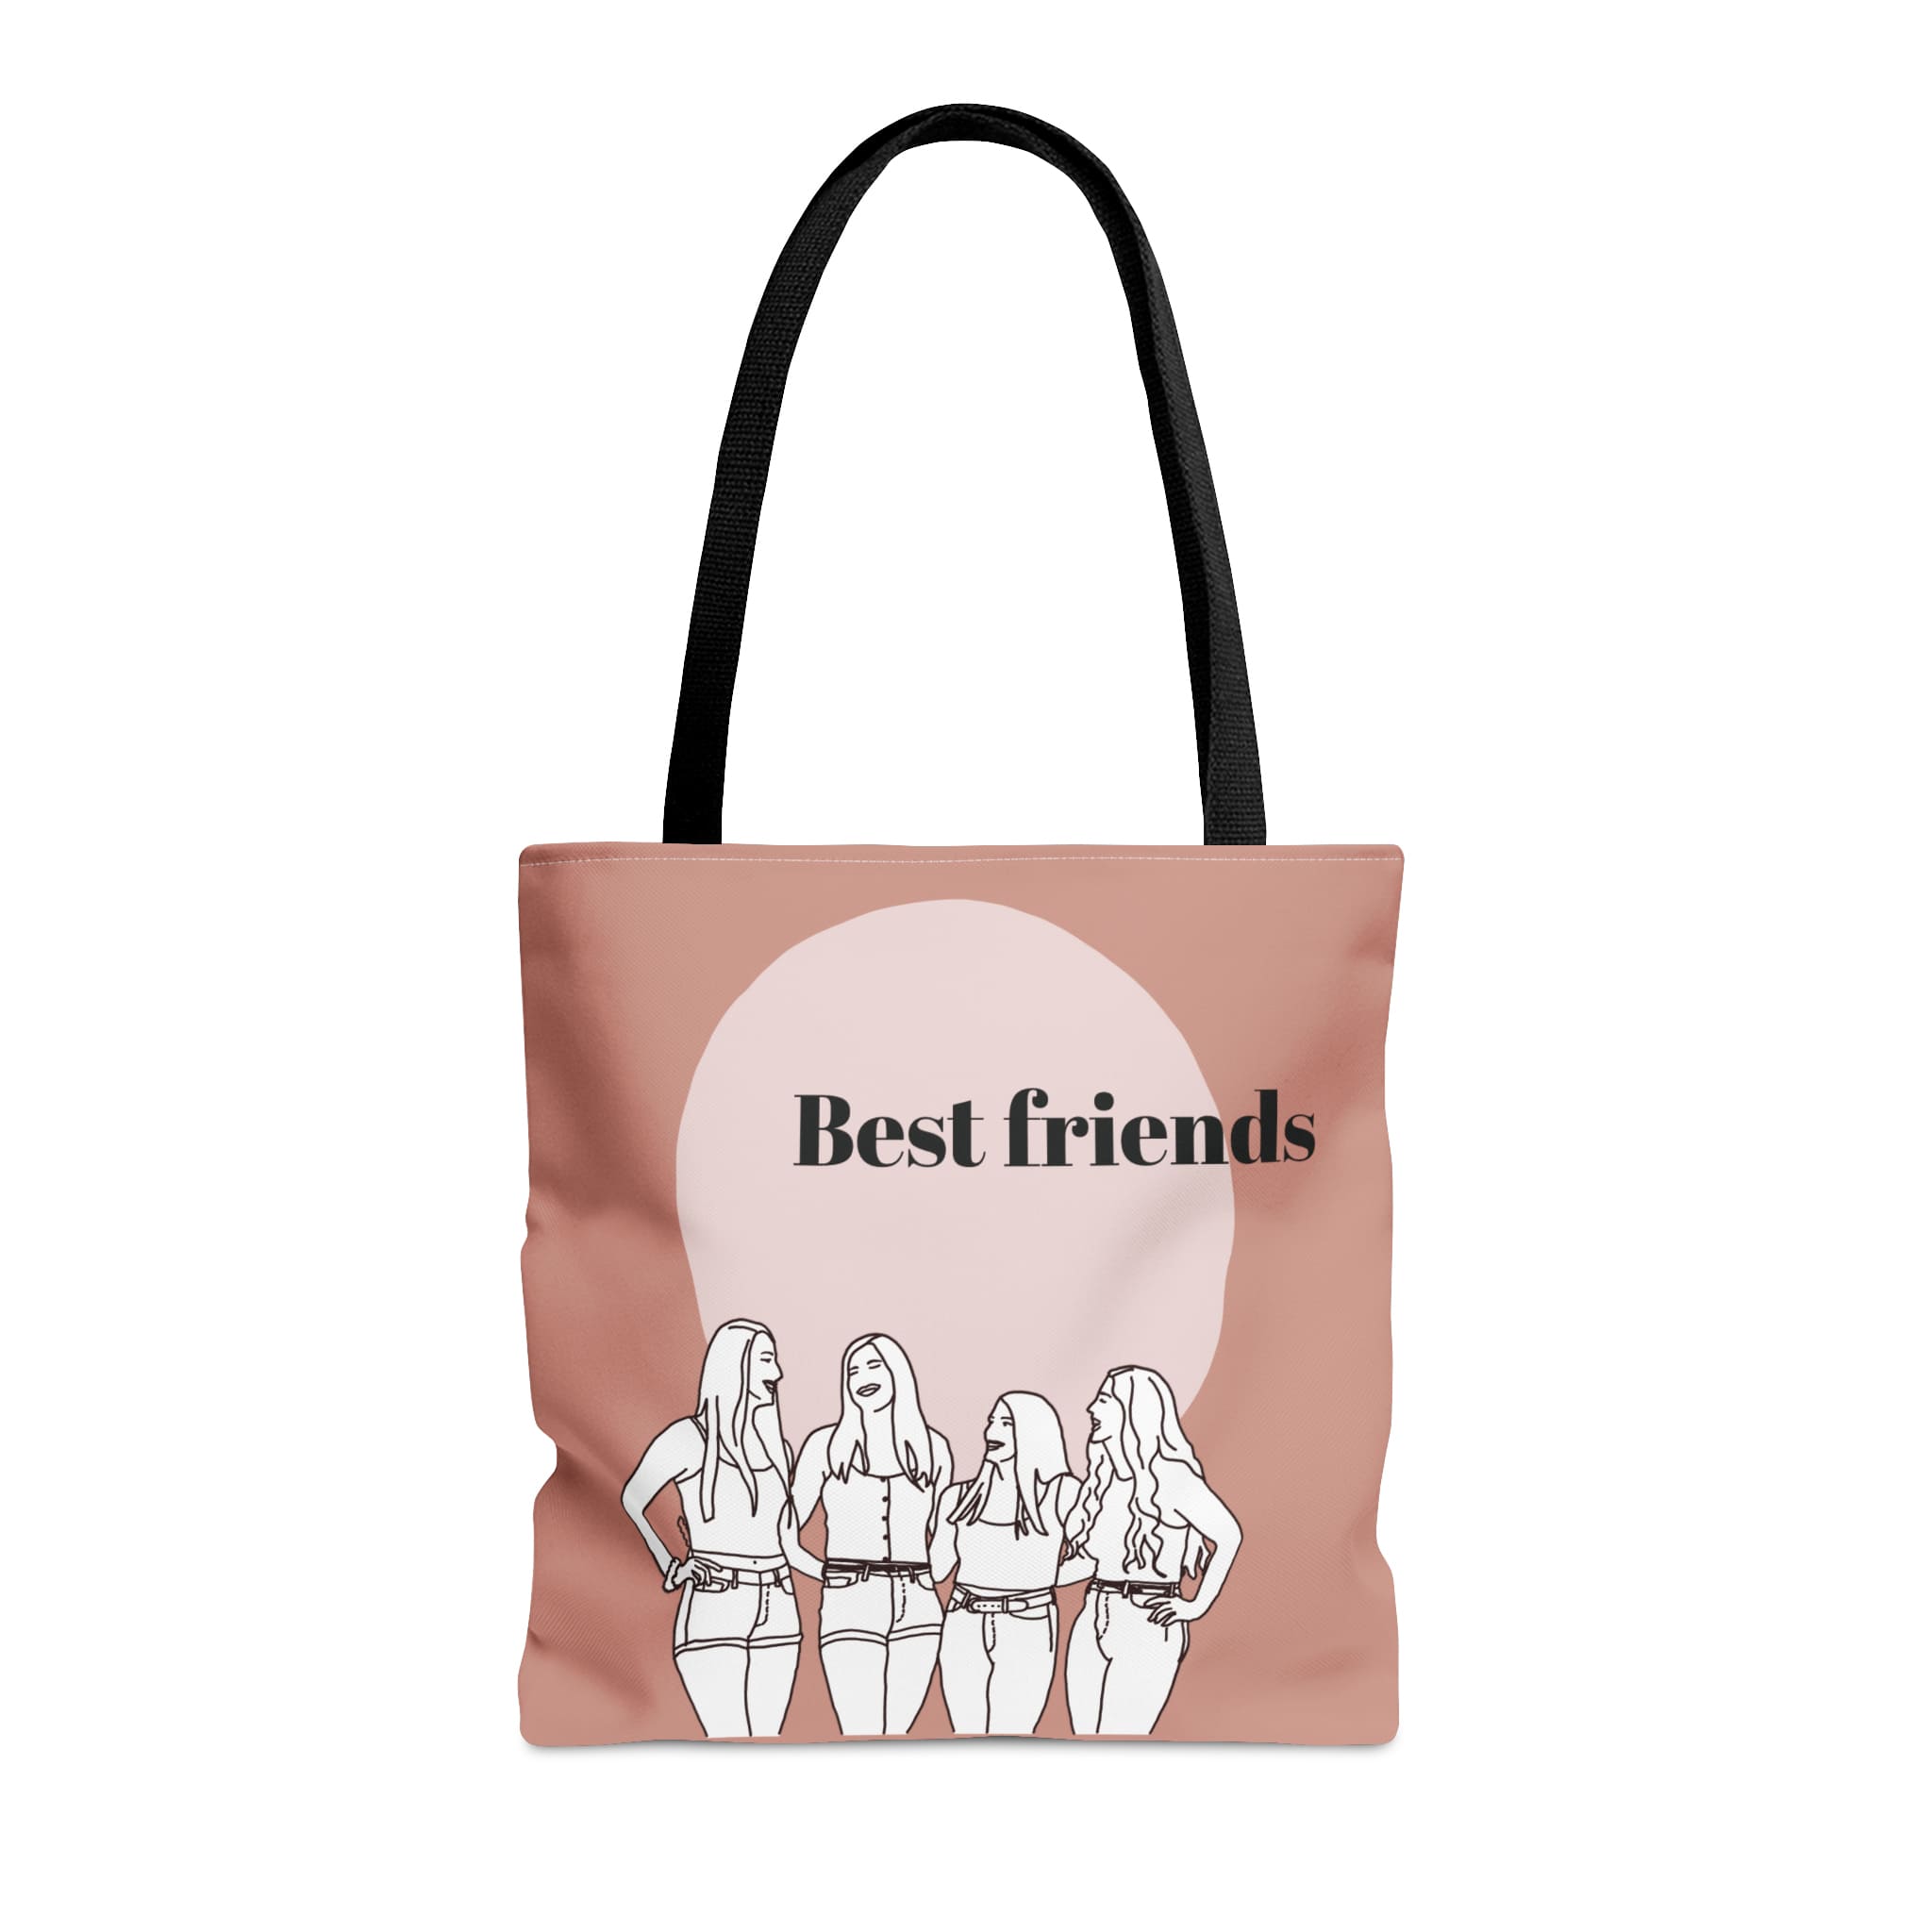 cute pastel pink tote bag with custom line art portrait illustration of best friends an ideal brides maid gift